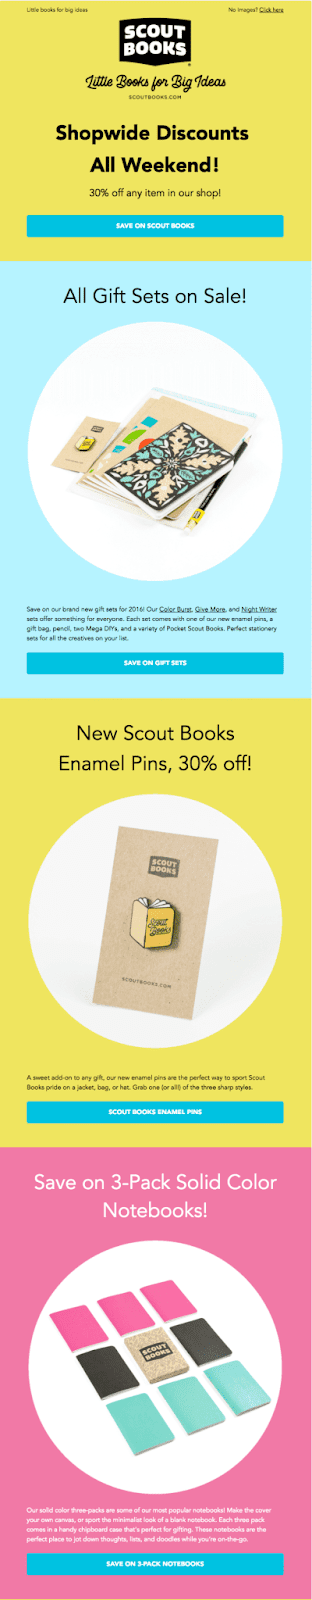 This Small Business Saturday idea shows an email campaign from Scout Books promoting a site-wide 30% off weekend sale.